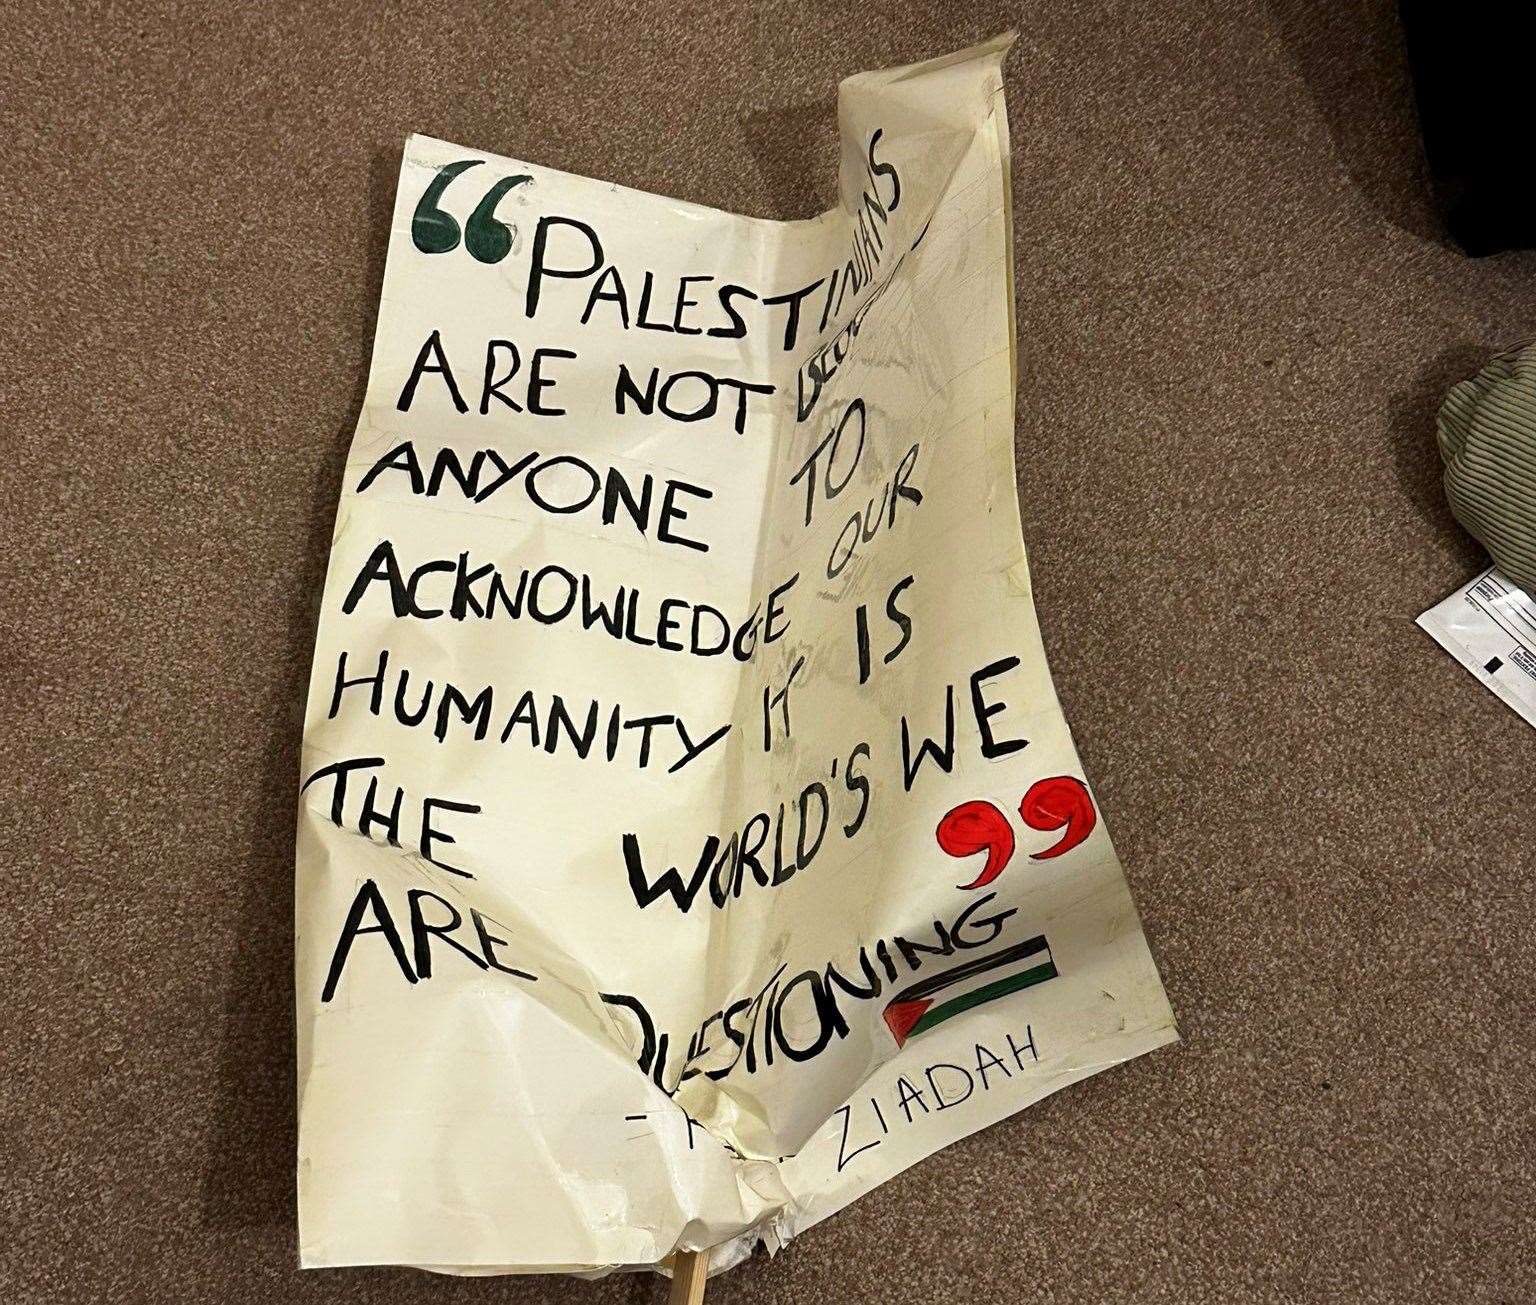 The pro-Palestine sign that was screwed up on the train before the reported incident in Folkestone Central Station